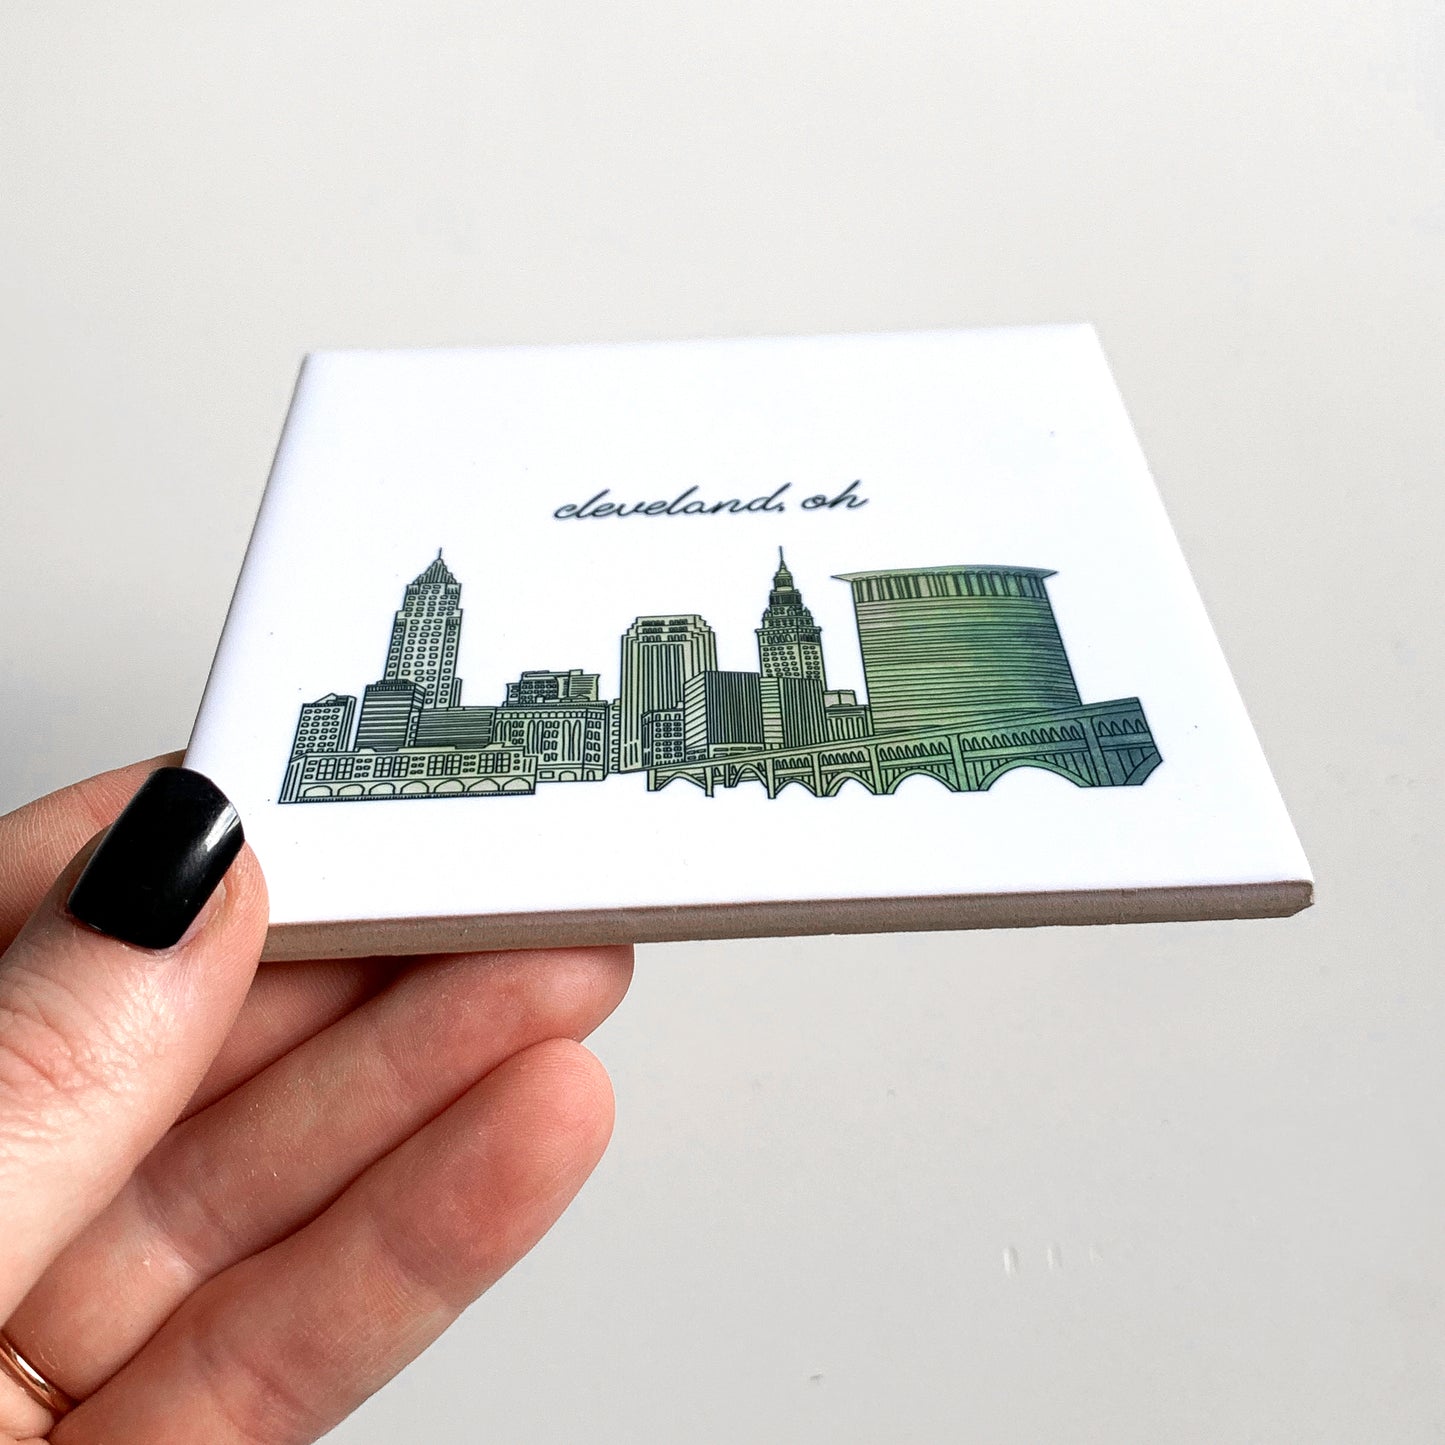 A hand holding a ceramic coaster with a skyline drawing on it, showing the tile edges.